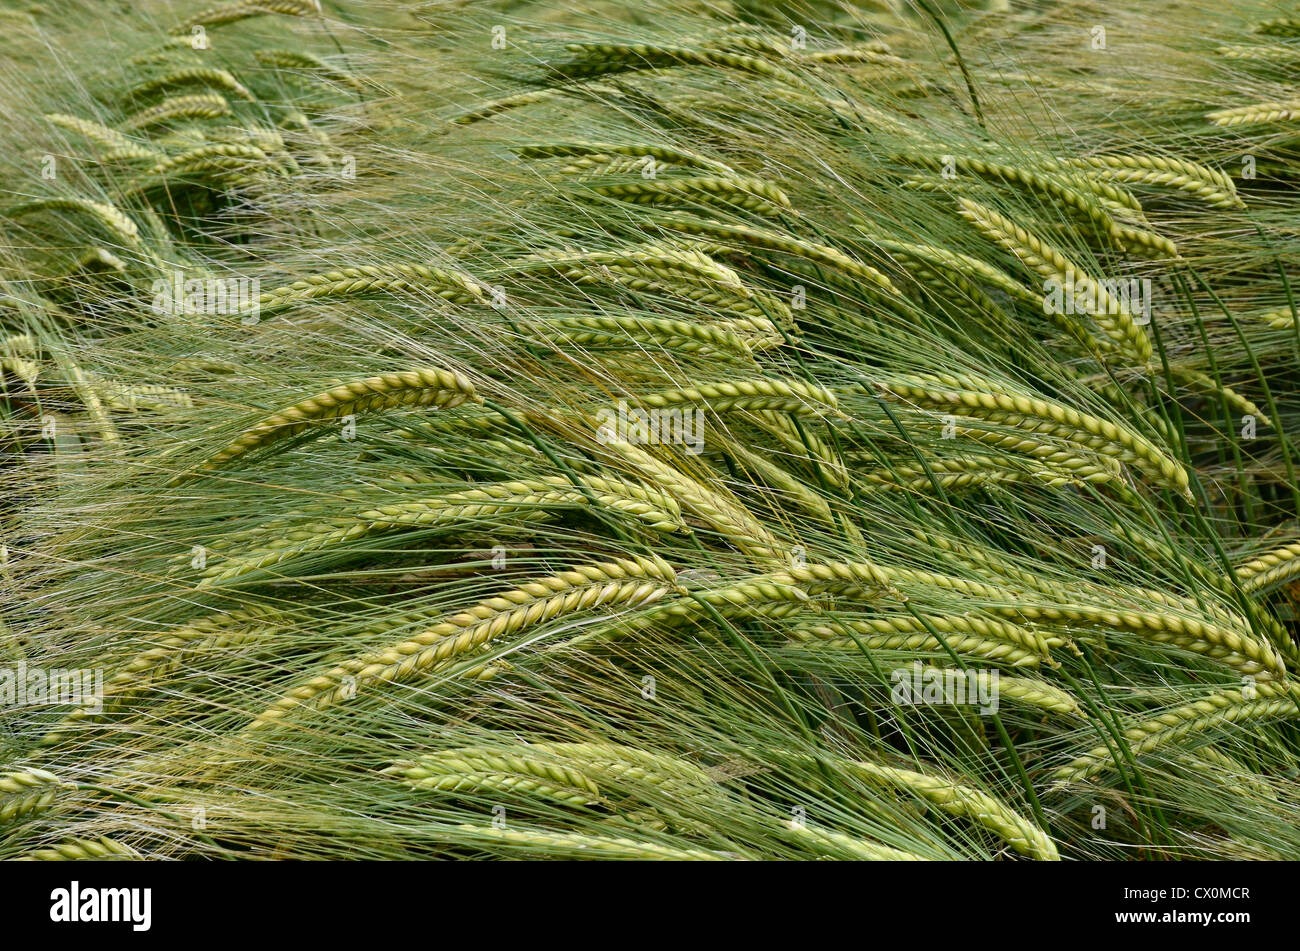 Ripening barley glumes. Key focal point are the glumes in picture centre. Visual metaphor for concept of famine, and food security. Stock Photo